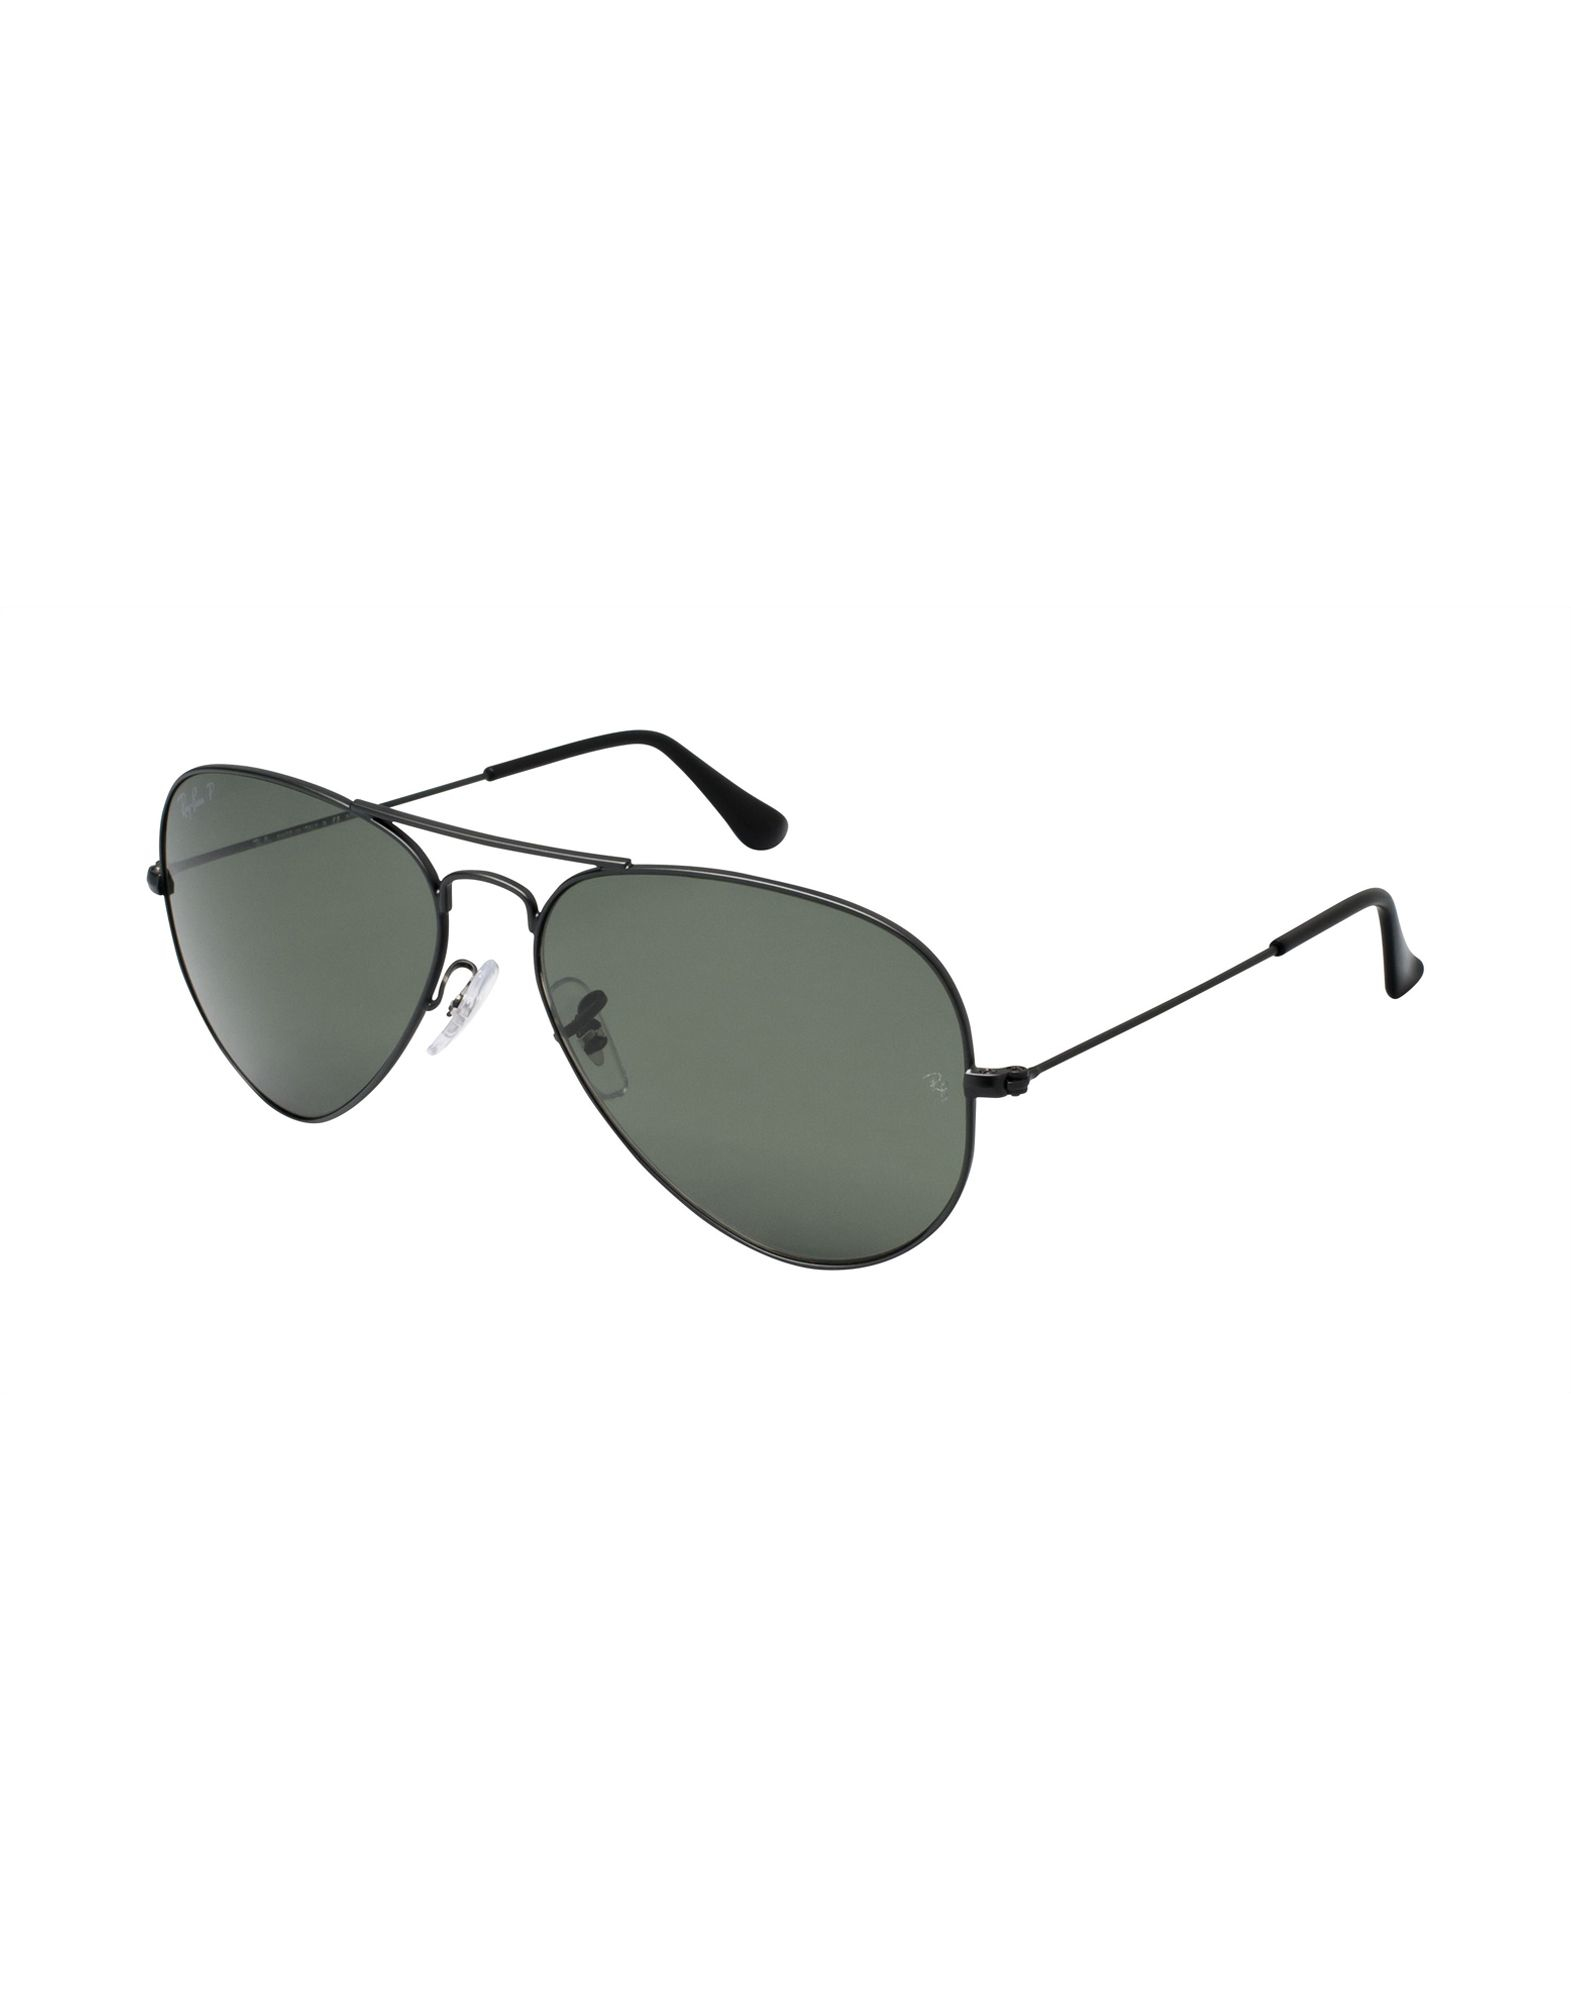 Lyst - Ray-Ban Sunglasses in Black for Men